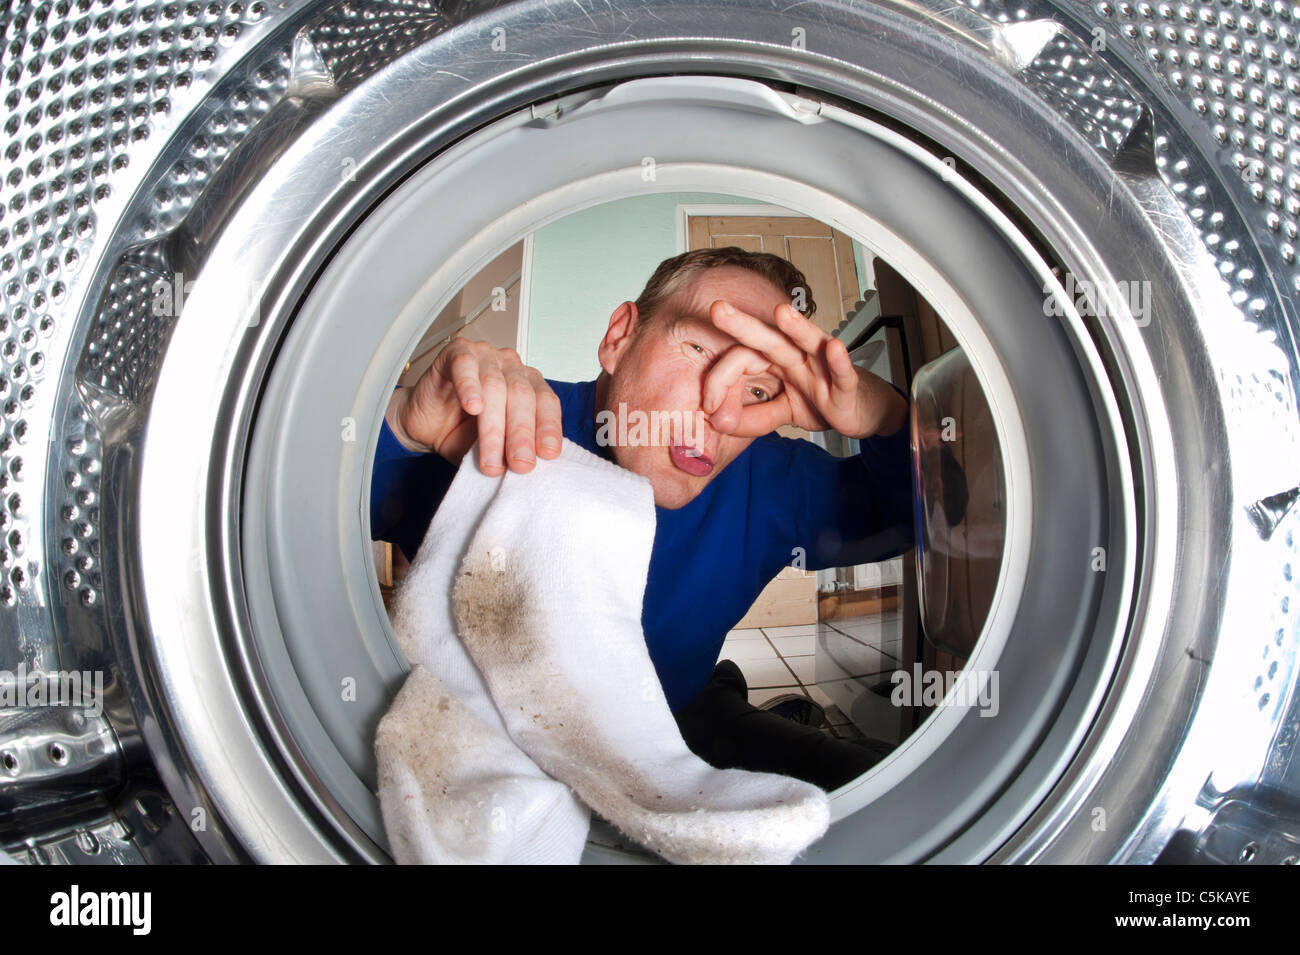 man holding nose putting smelly dirty socks into washing machine Stock Photo